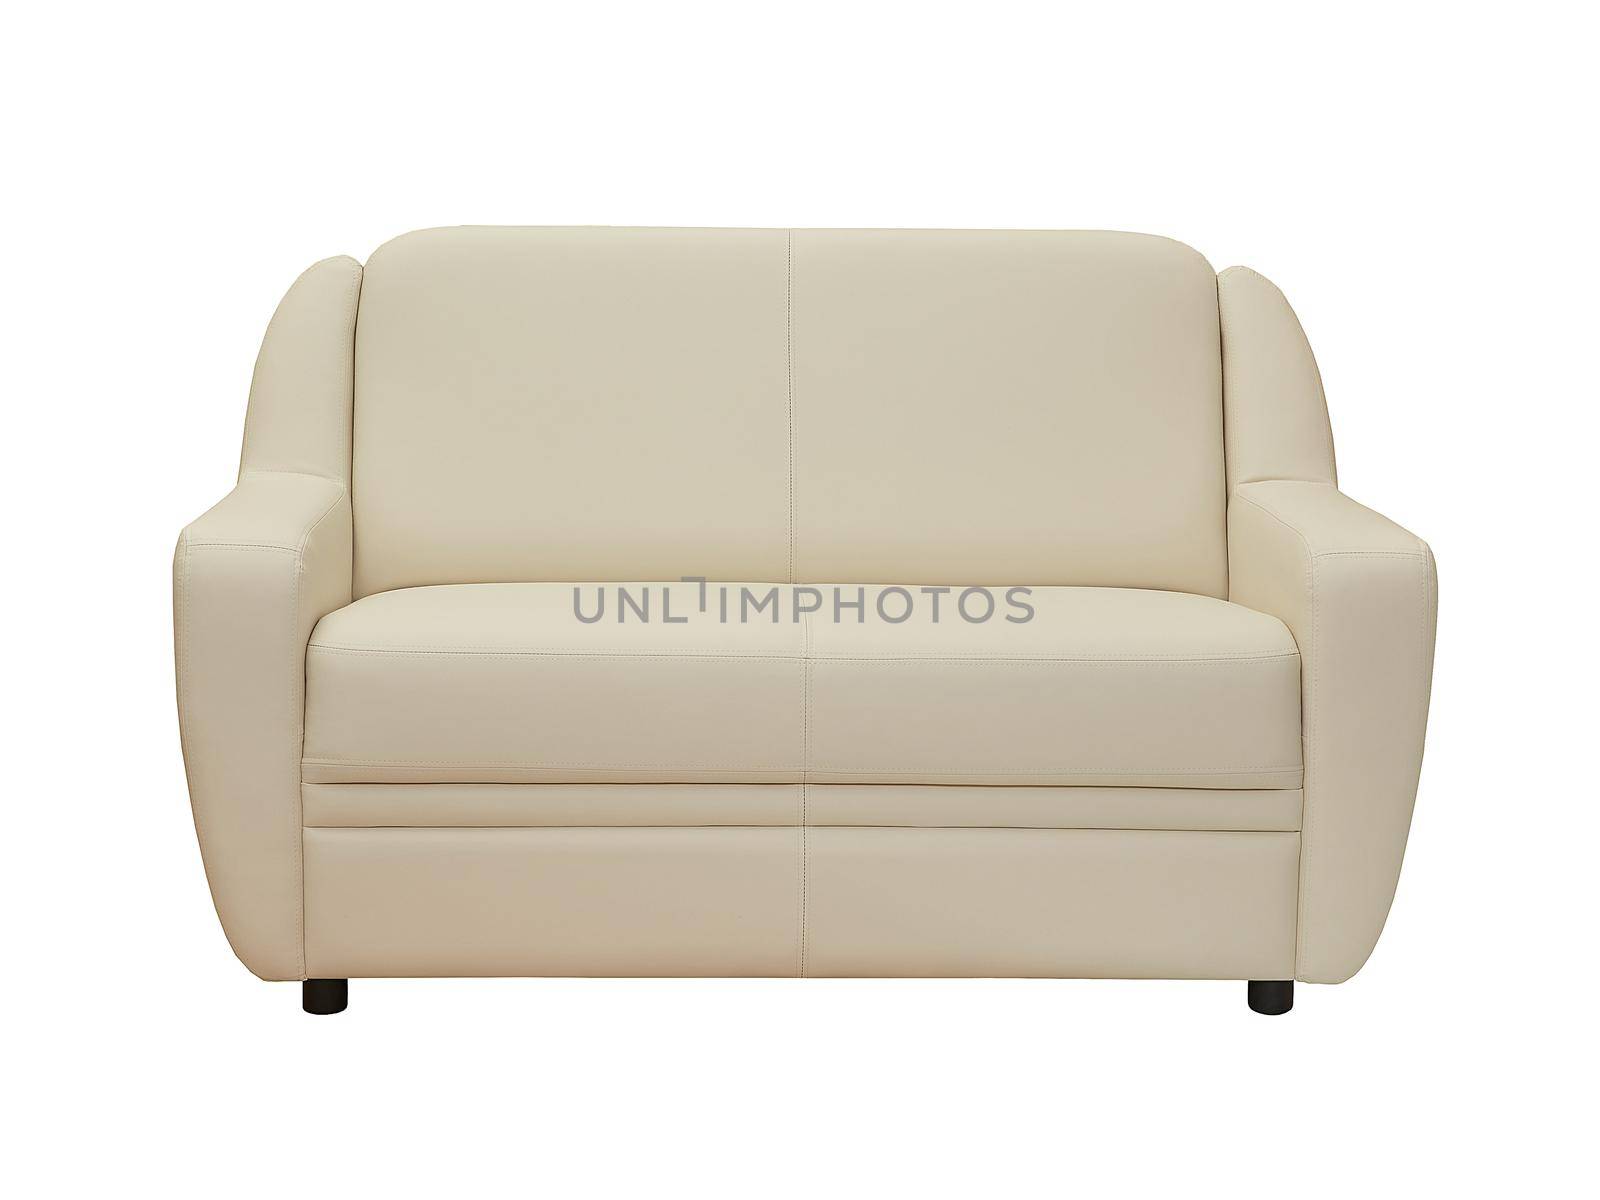 small beige contemporary leather couch isolated on white background, front view. modern furniture in minimal style, interior, home or office design